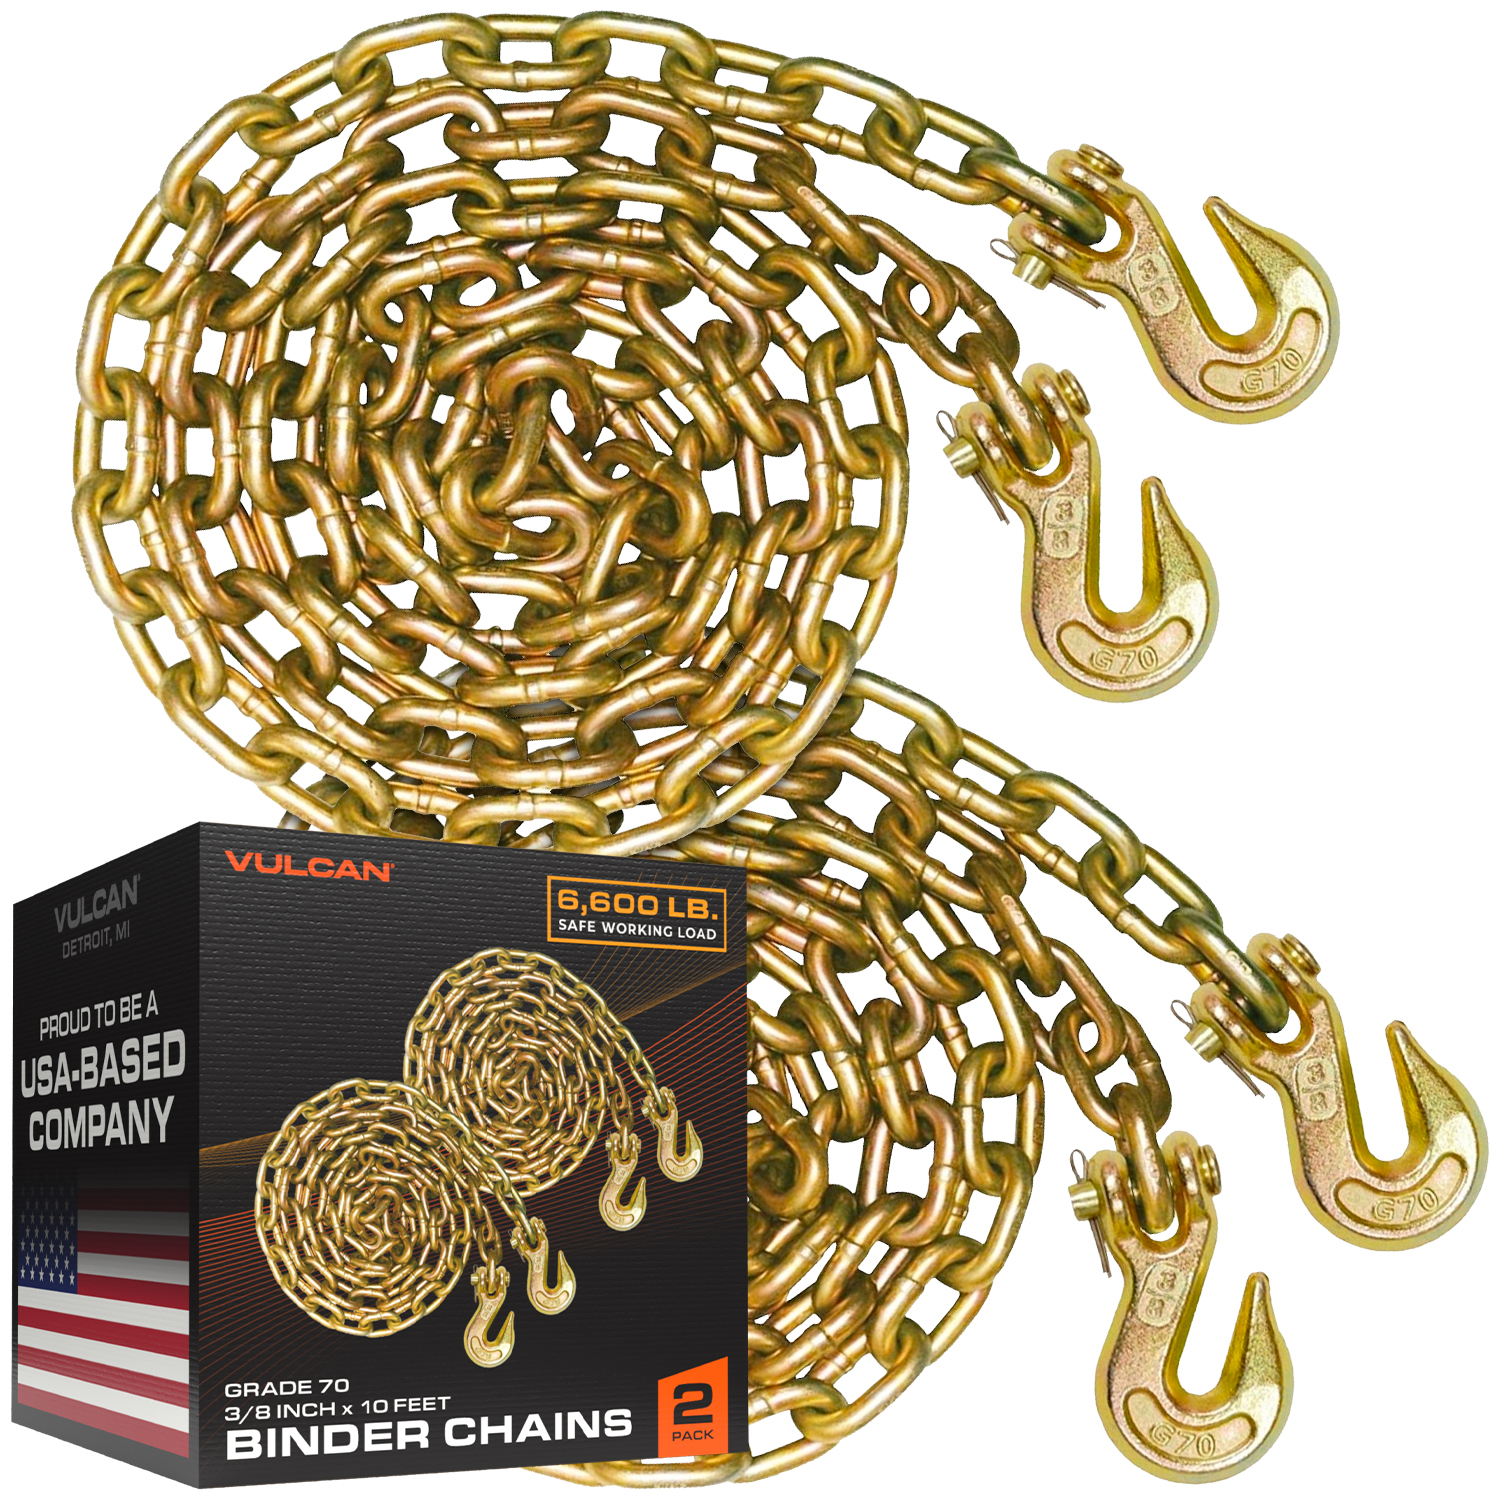 G70 Binder Chain 3/8 x 20 FT with Heavy Duty Grab Hooks Transport